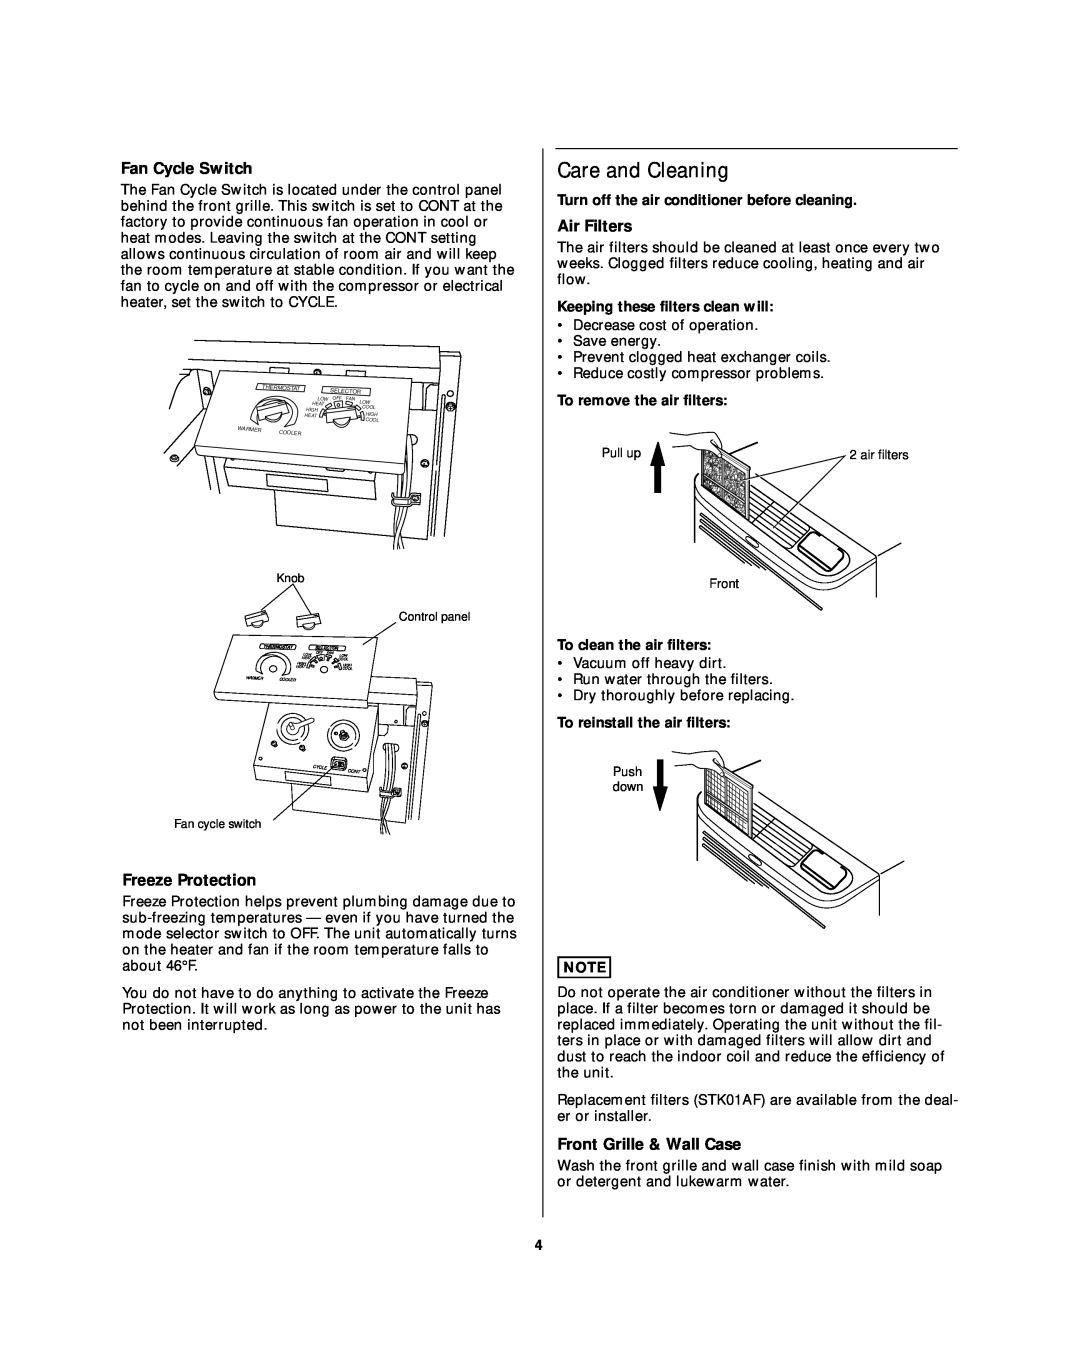 Sanyo STW-2 Series Care and Cleaning, Fan Cycle Switch, Air Filters, Freeze Protection, Front Grille & Wall Case 